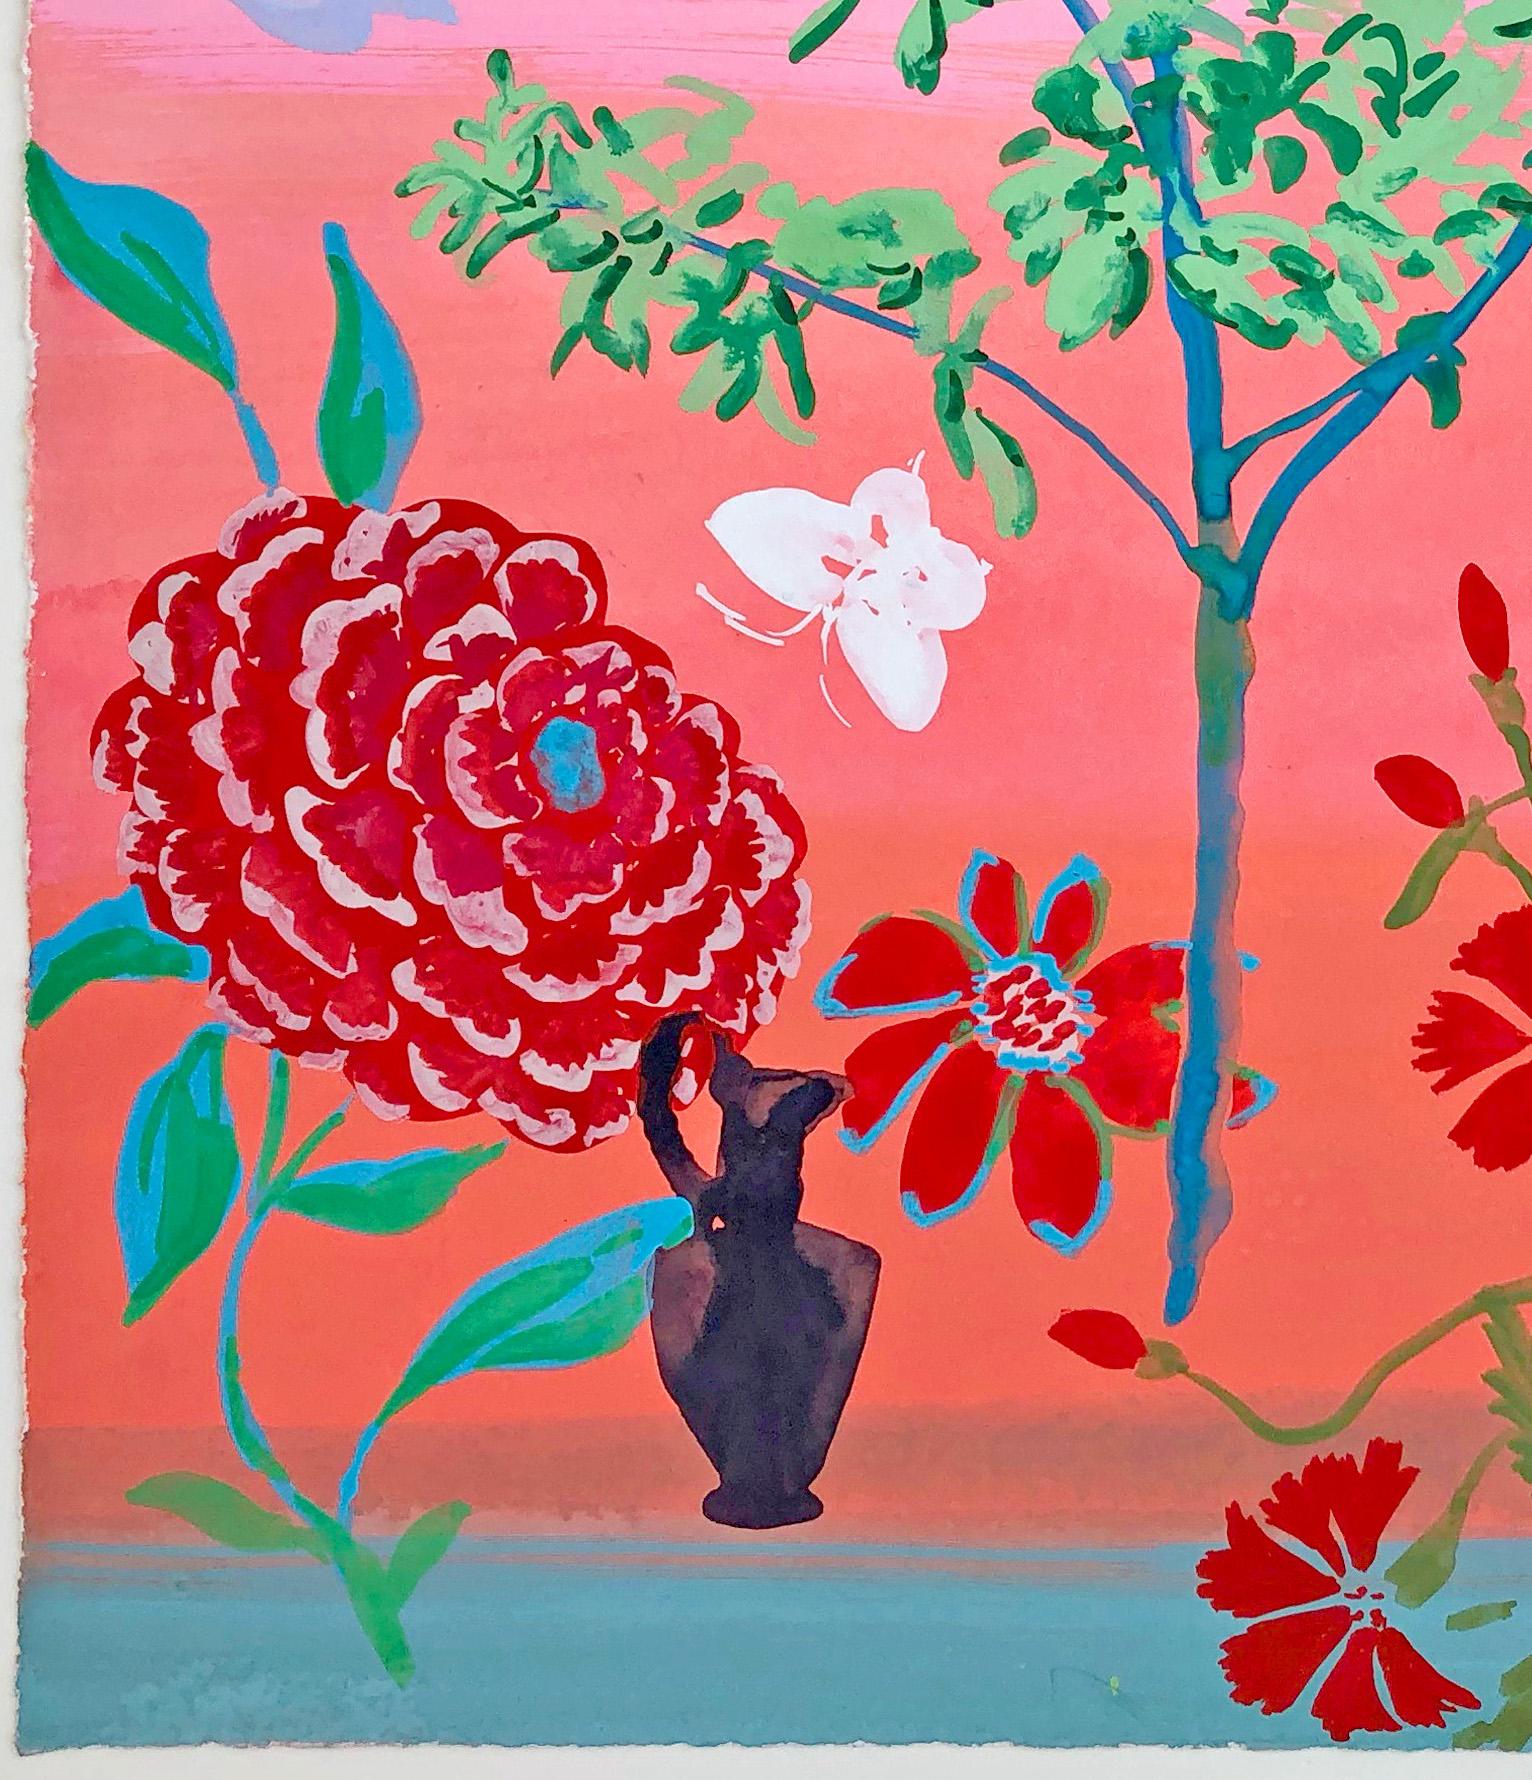 Lake on the Mountain, Red and Pink Flowers, Butterfly, Figure, Peach Background - Painting by Melanie Parke